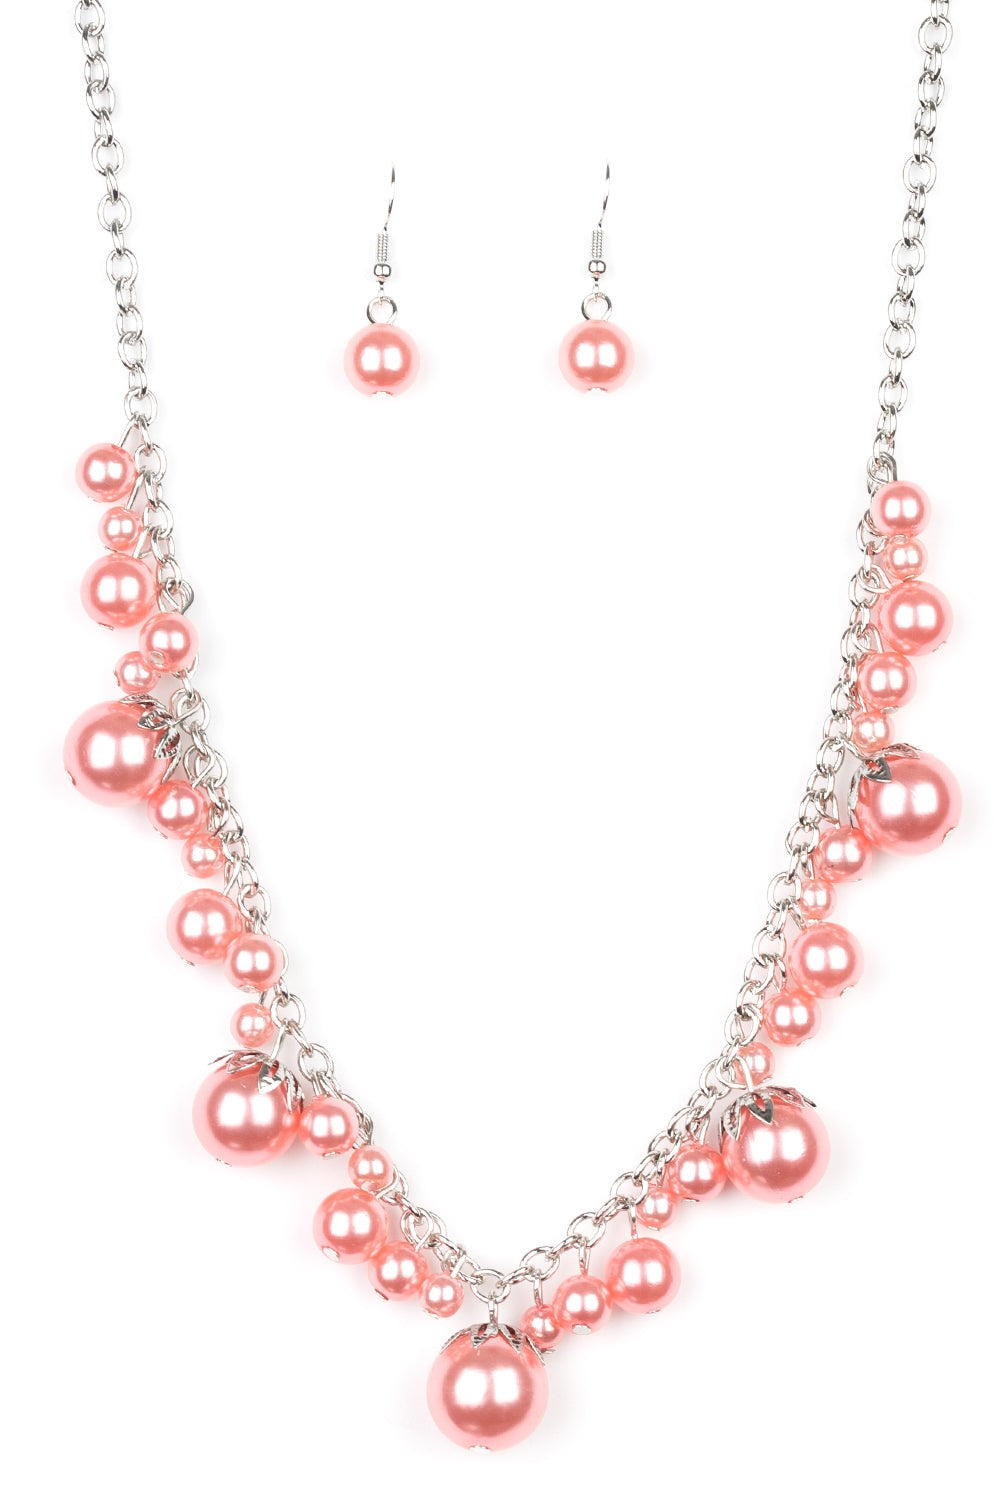 Uptown Pearls Coral Necklace and Earrings